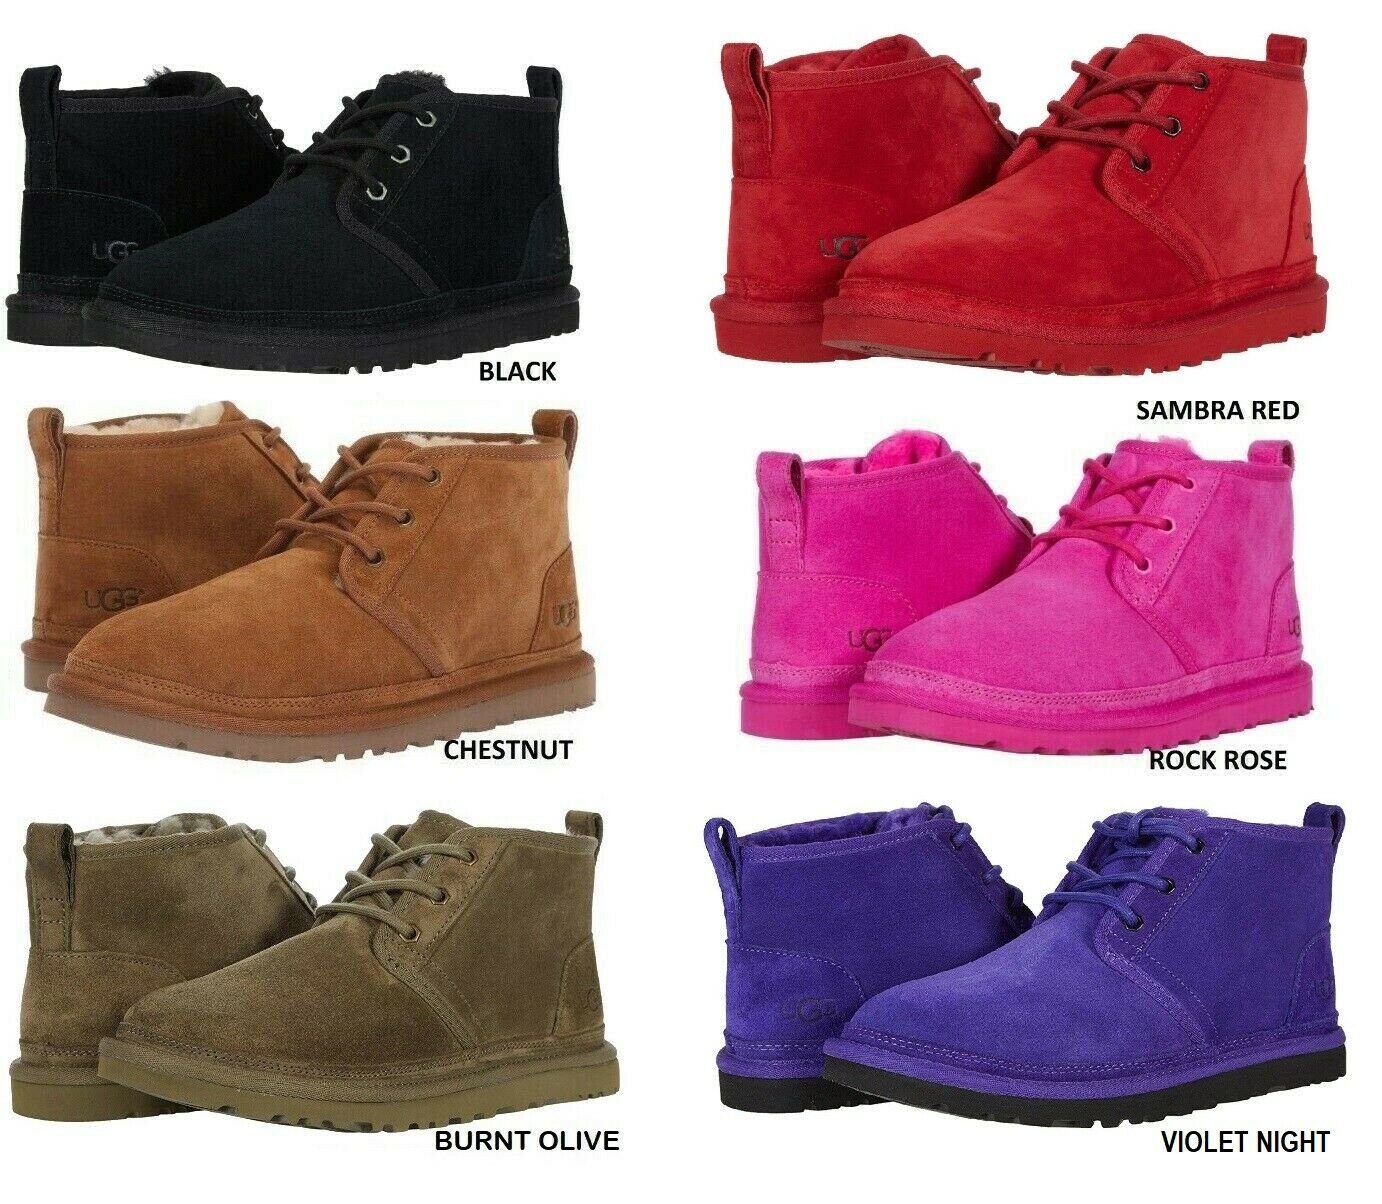 NEW Authentic UGG Women's Winter Boots Shoes Neumel Black Chestnut Pink Red +